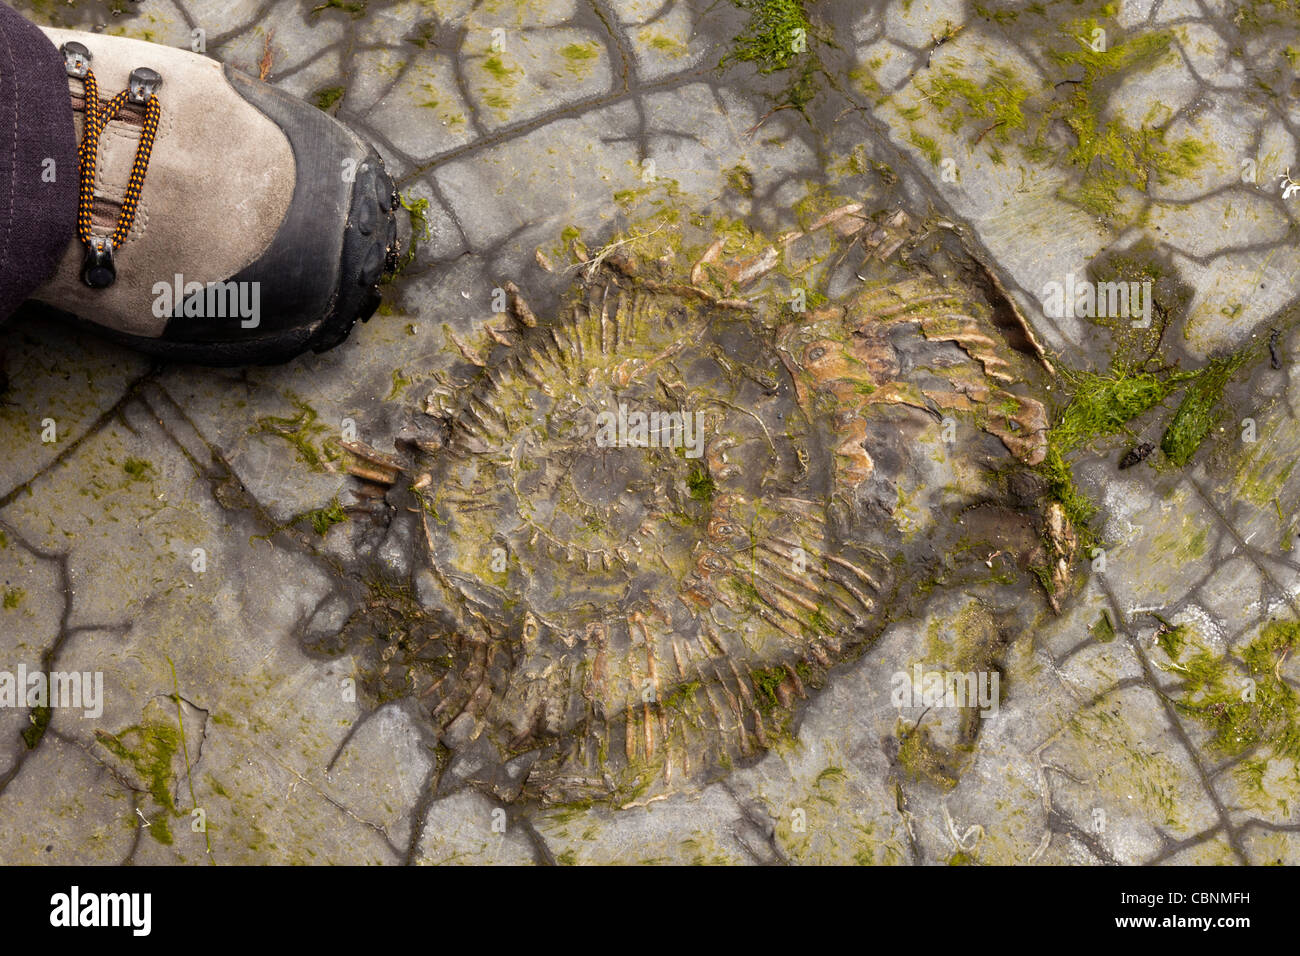 Ammonite fossil revealed on a rock platform at Kimmeridge Bay, Dorset, with woman's boot for scale. Stock Photo